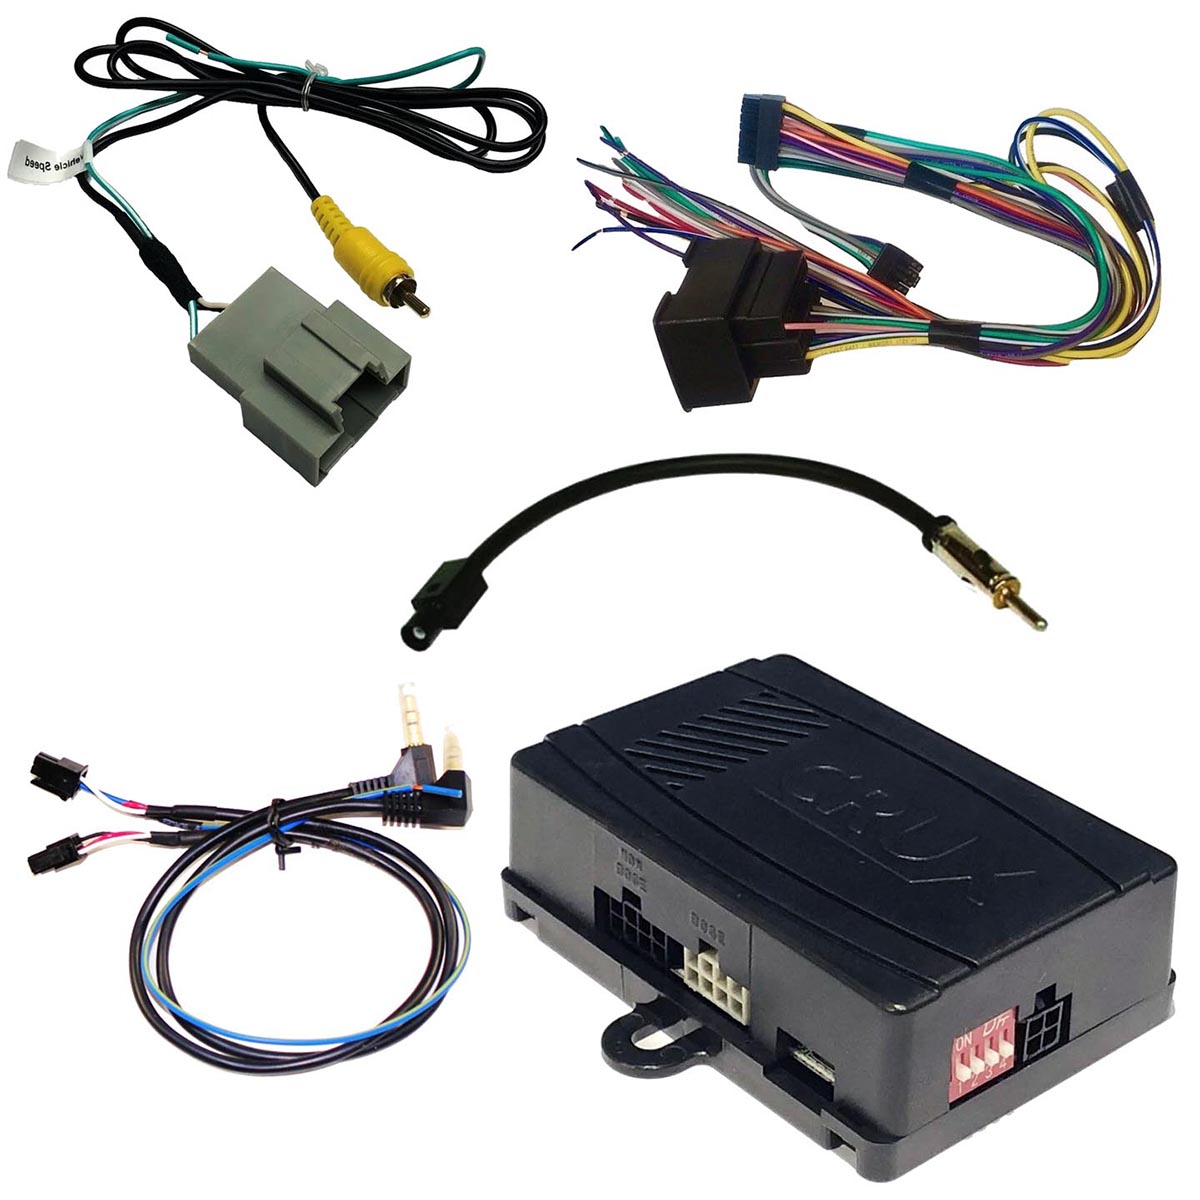 CRUX SWRGM-49N Radio Replacement Interface with SWC and factory RVC Retention for '10-'17 GM LAN 29 Bit Vehicle